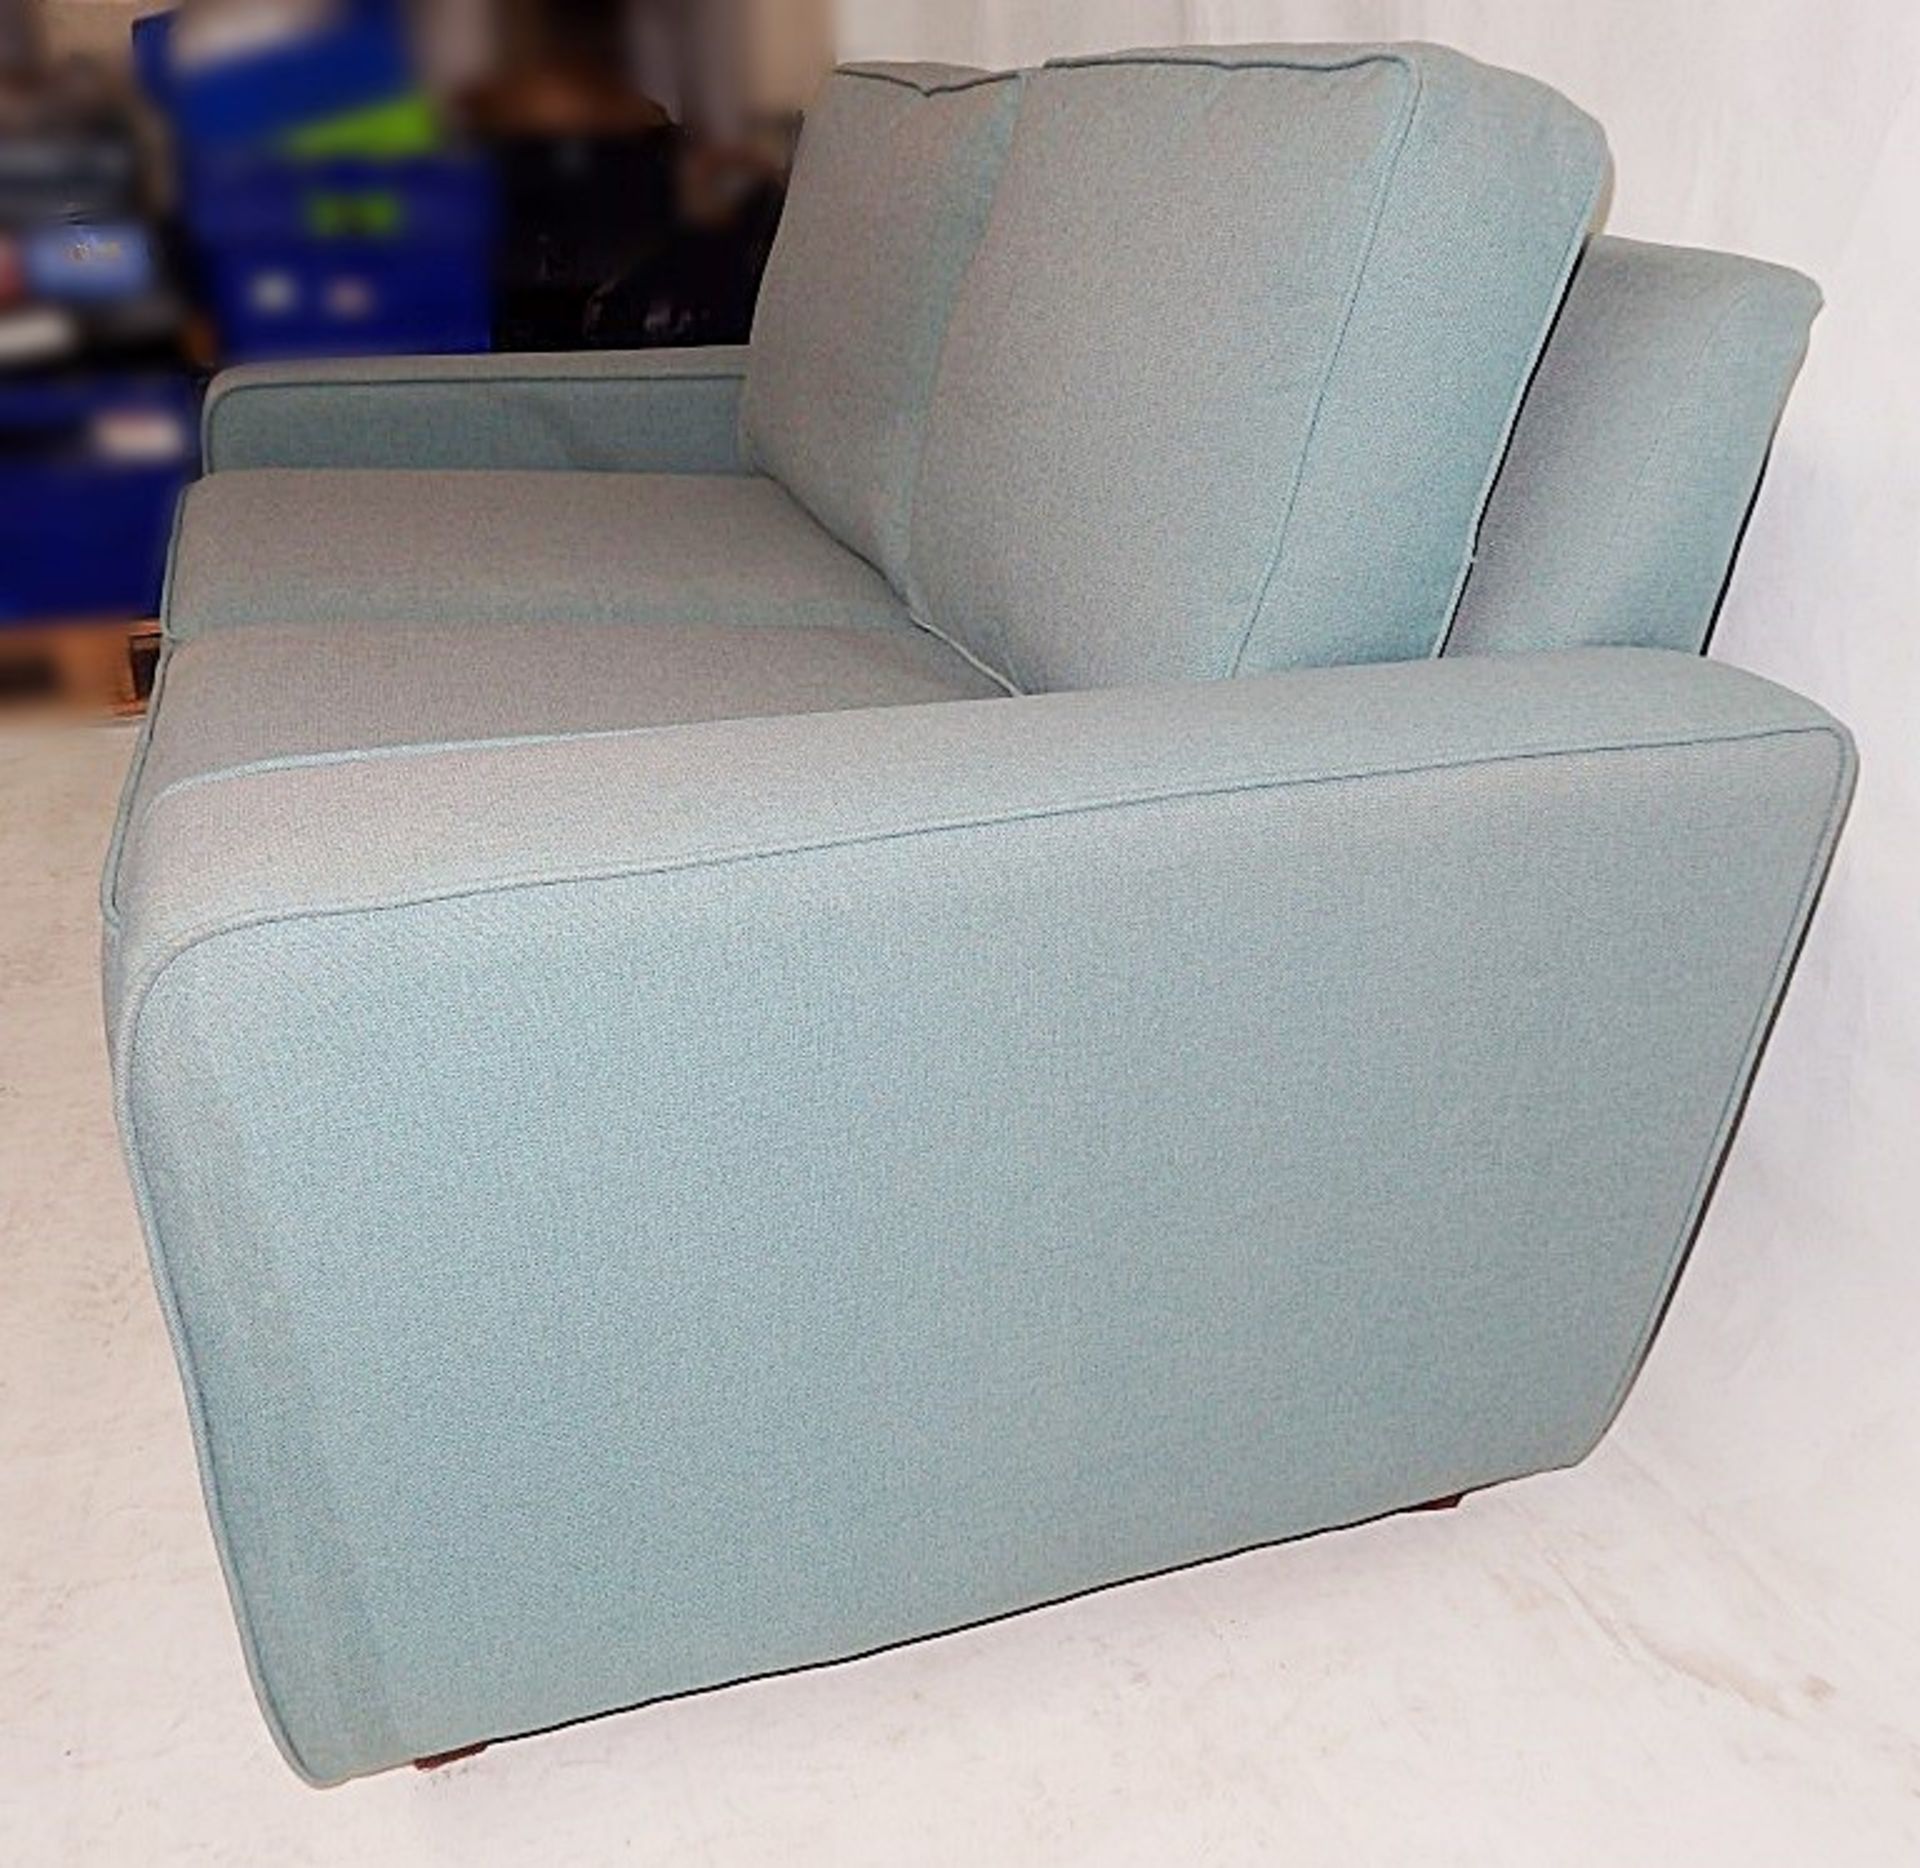 1 x Large Bespoke Turquoise Sofa - Expertly Built And Upholstered By British Craftsmen - Dimensions: - Image 4 of 6